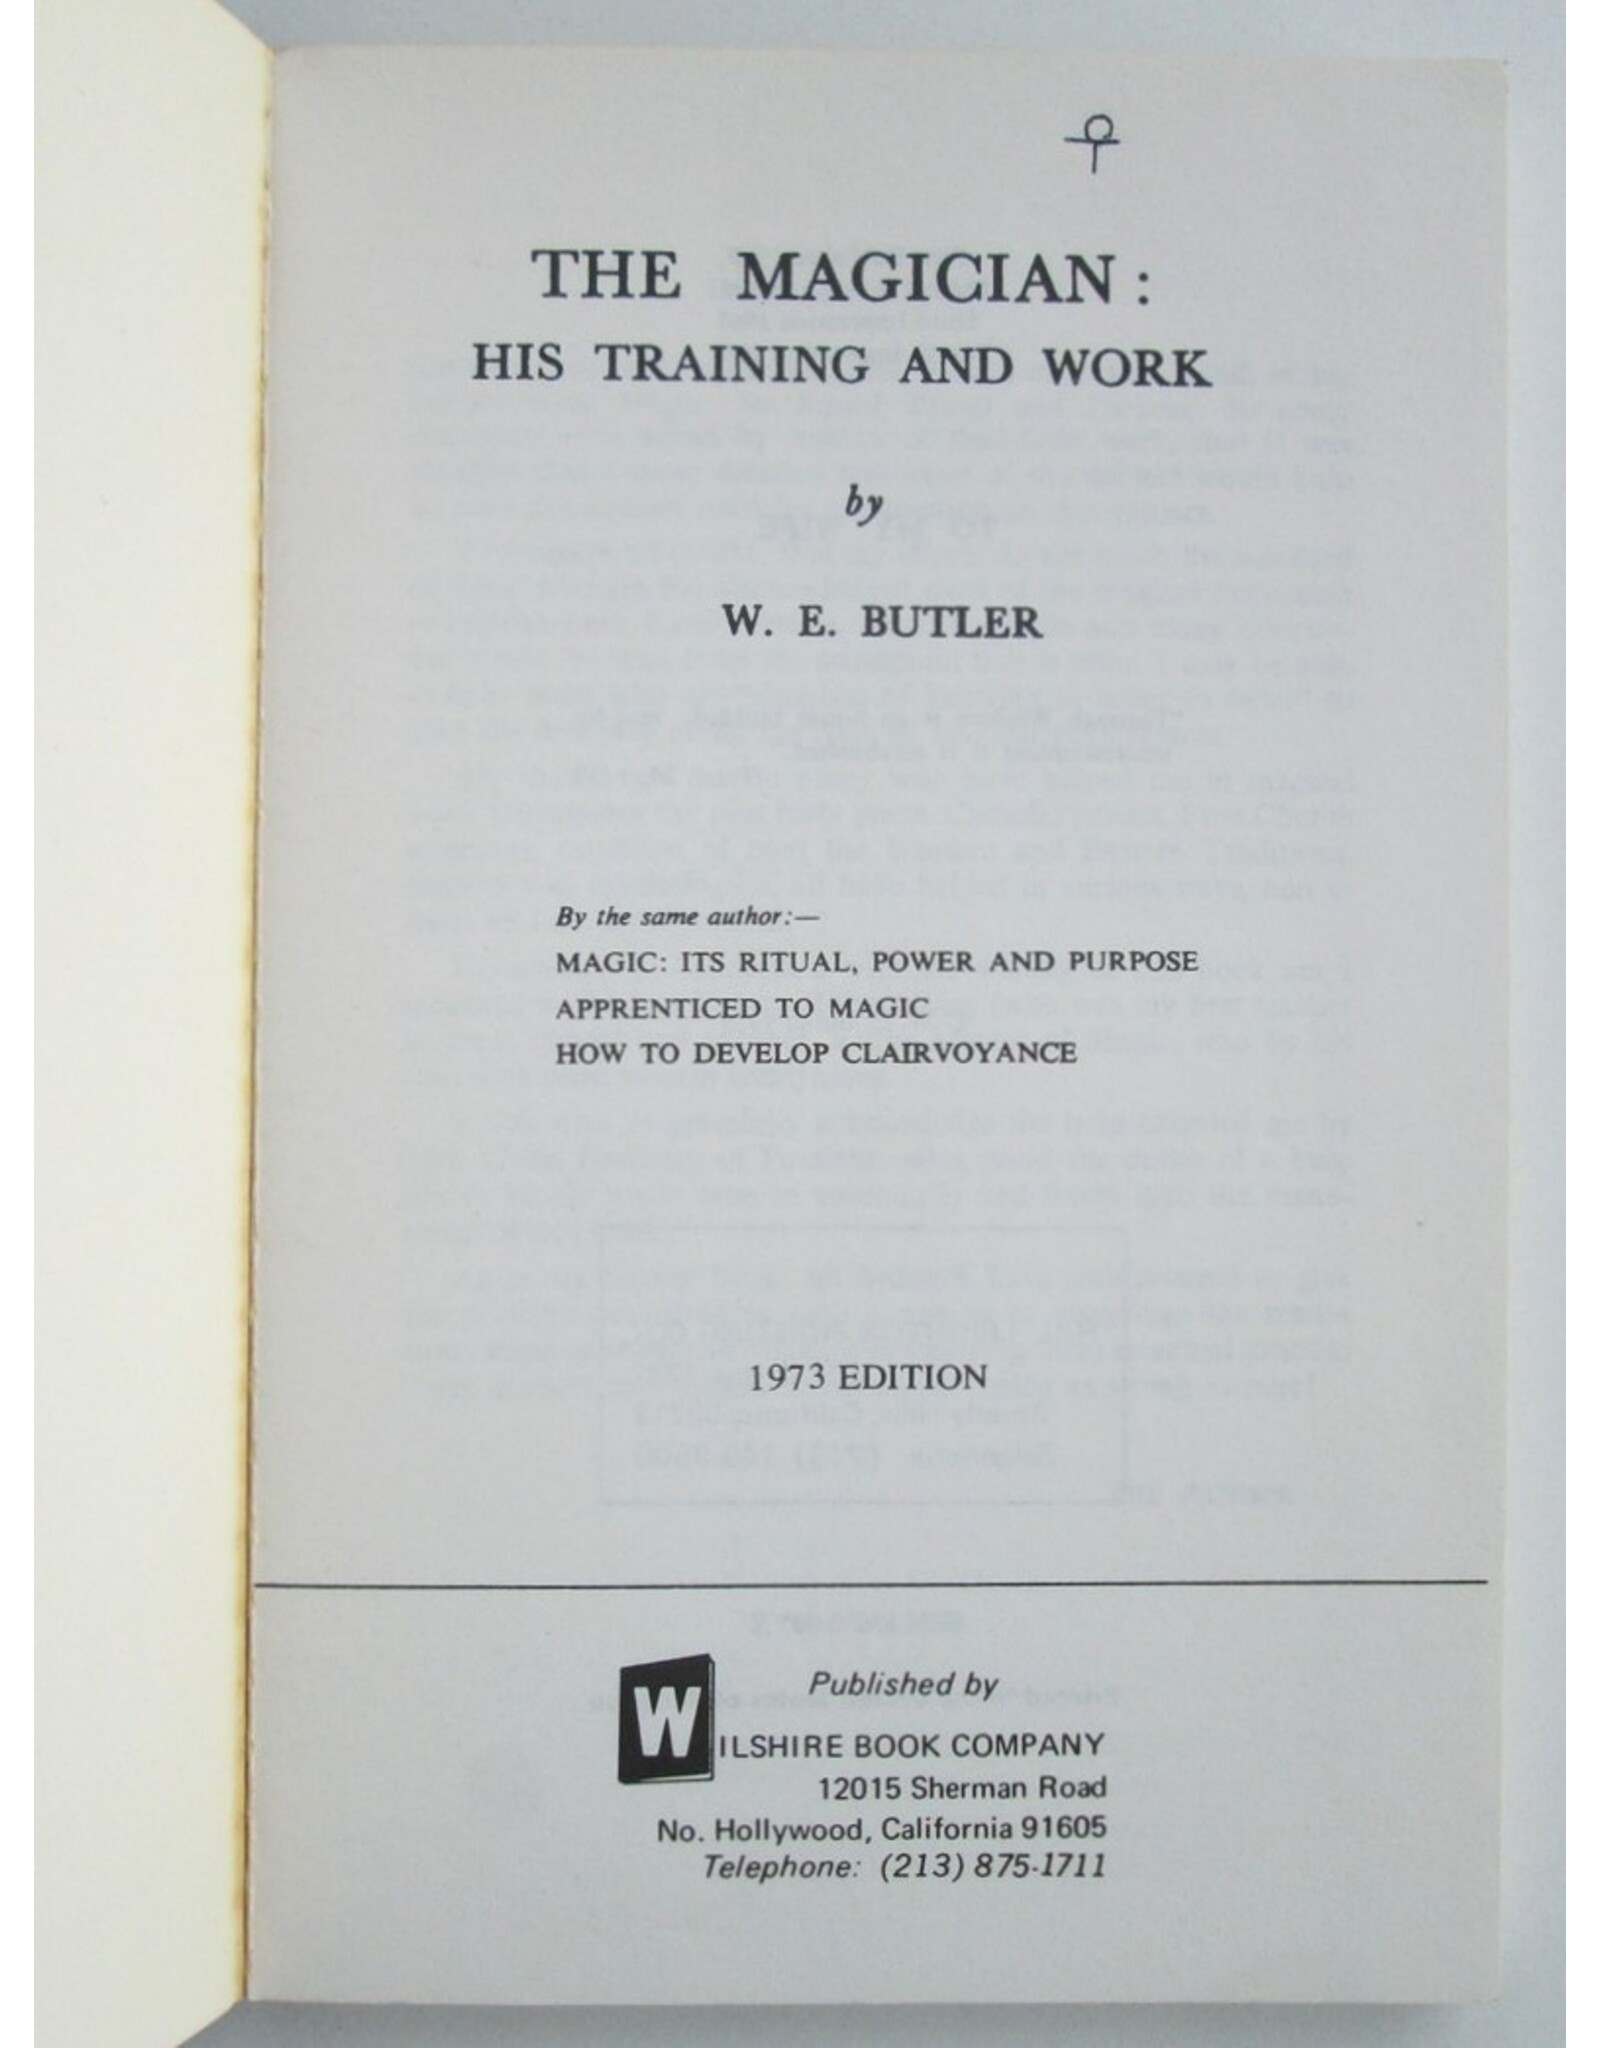 W.E. Butler - The Magician: His Training and Work